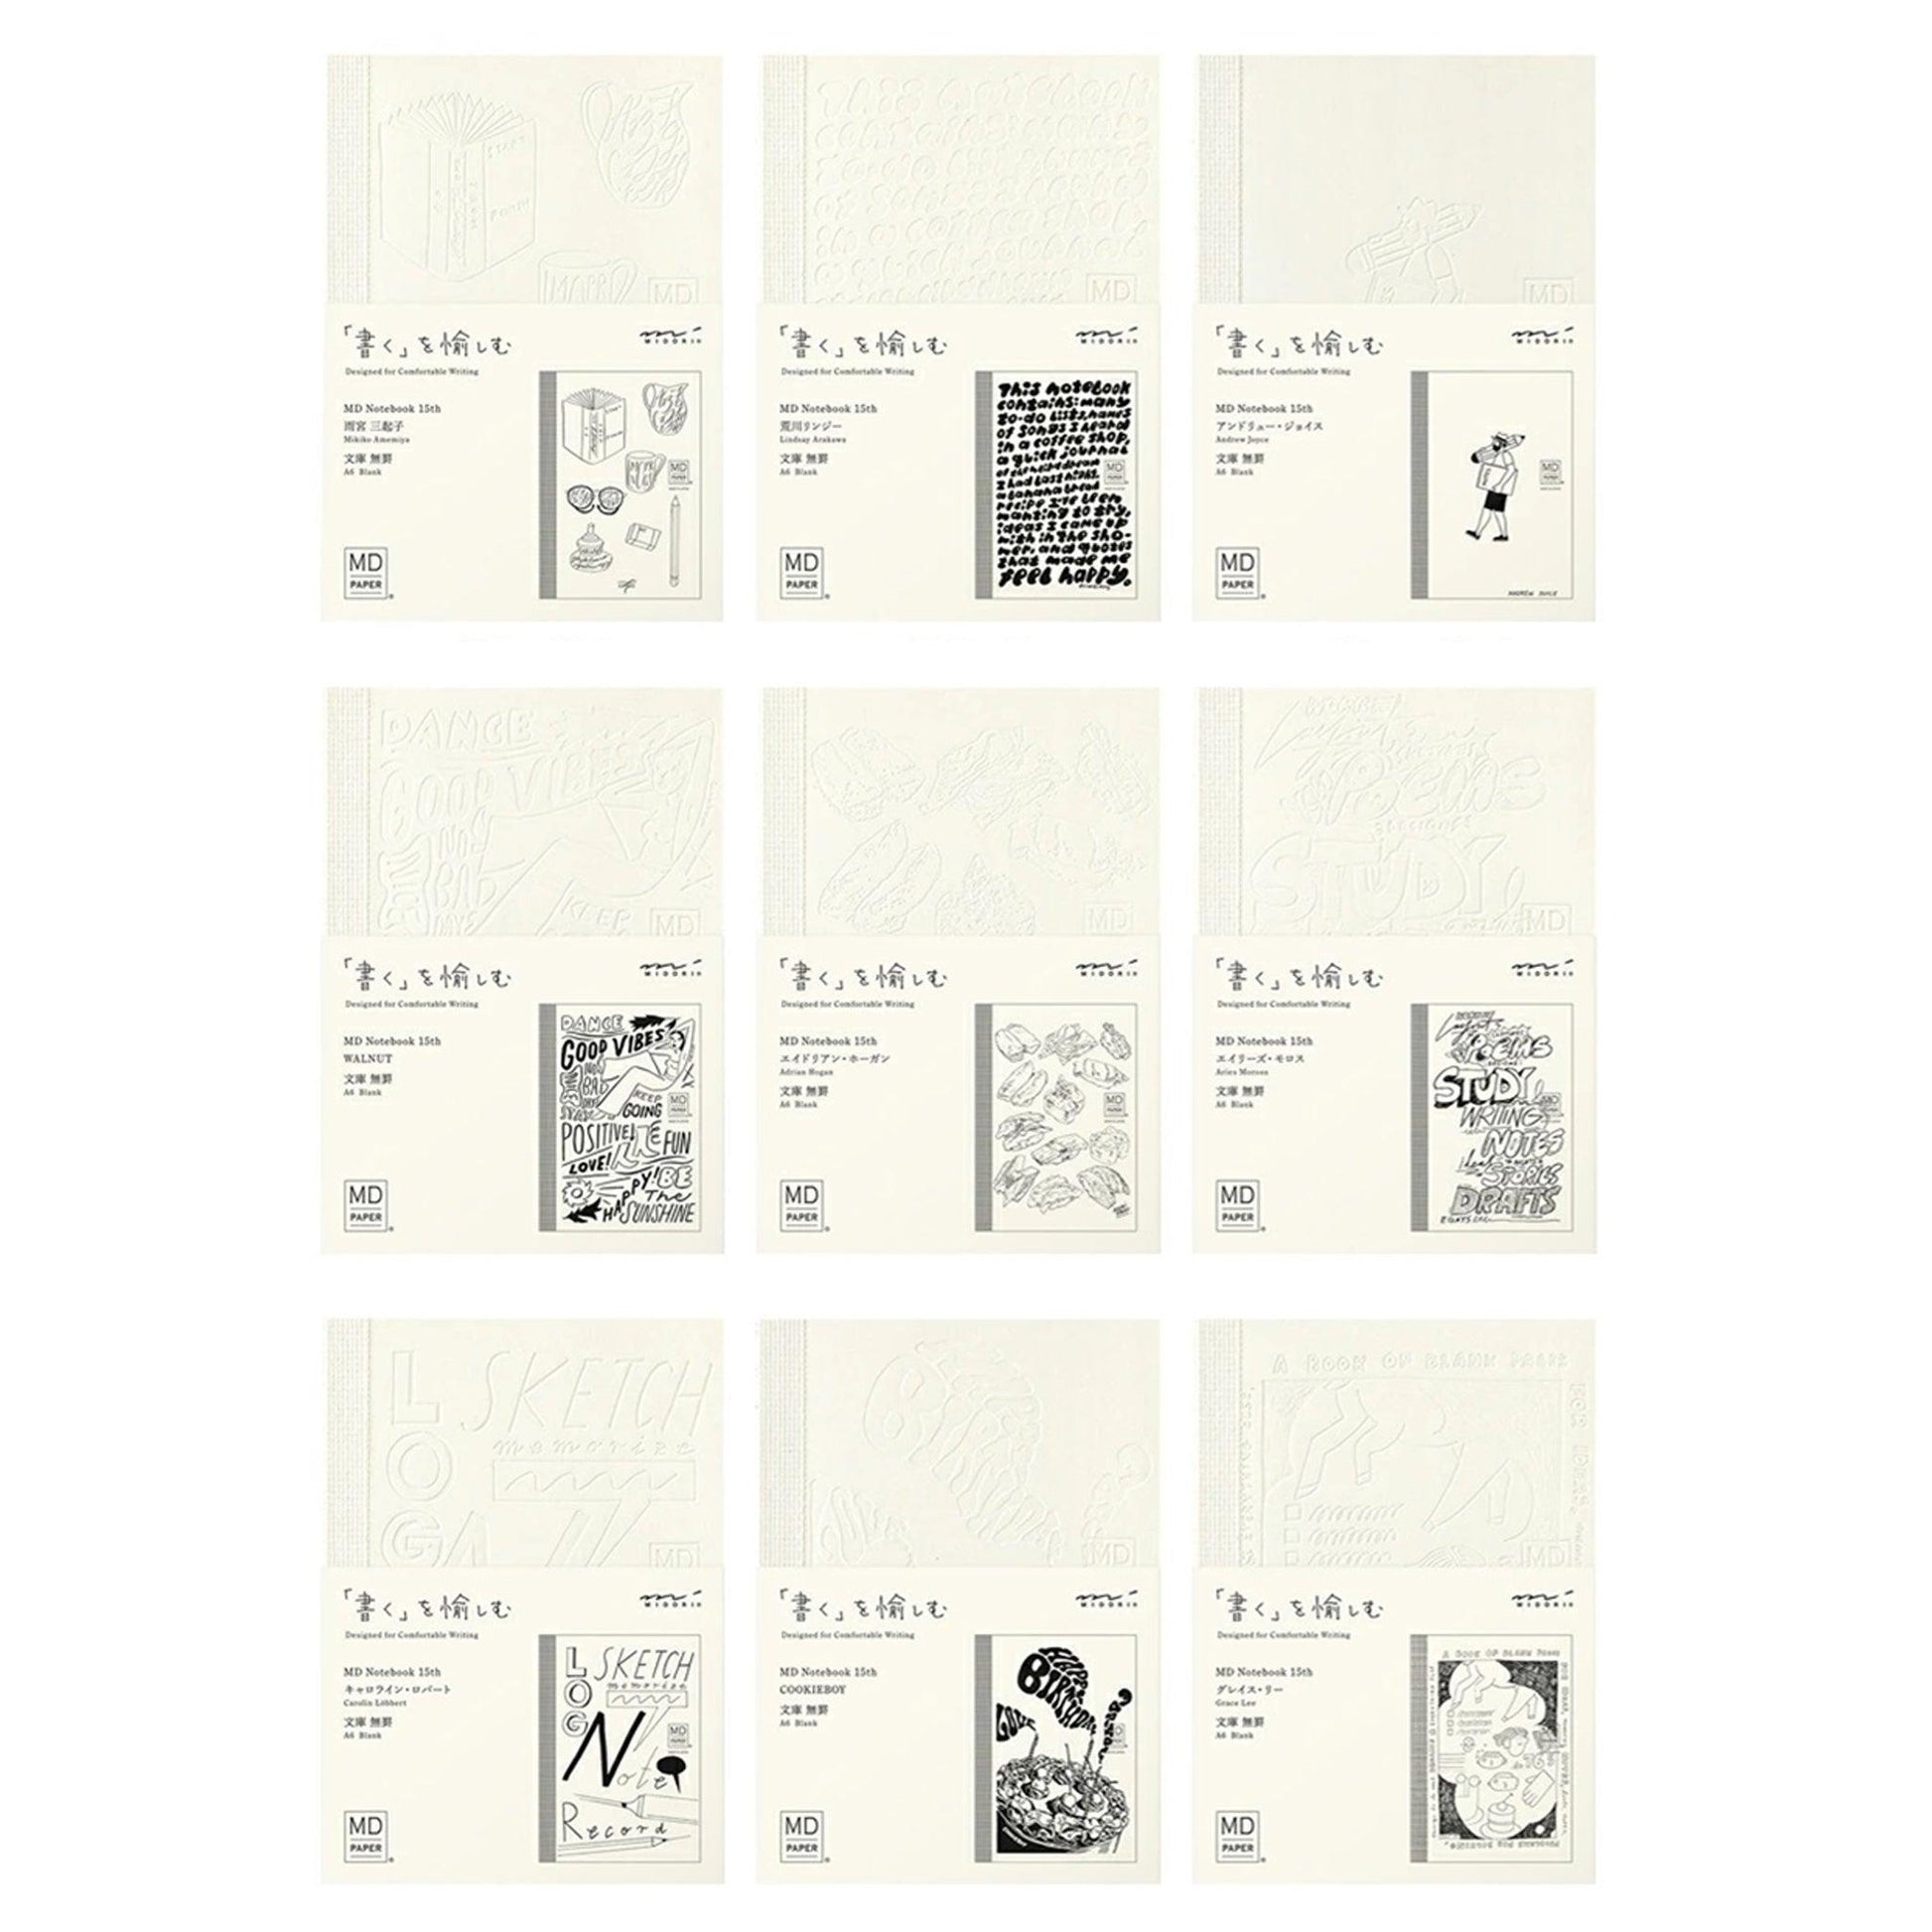 MIDORI MD 15TH ANNIVERSARY LIMITED EDITION JOINT NAME NOTEBOOK BLANK PAGE 15 BOOKS 15314006 - CHL-STORE 